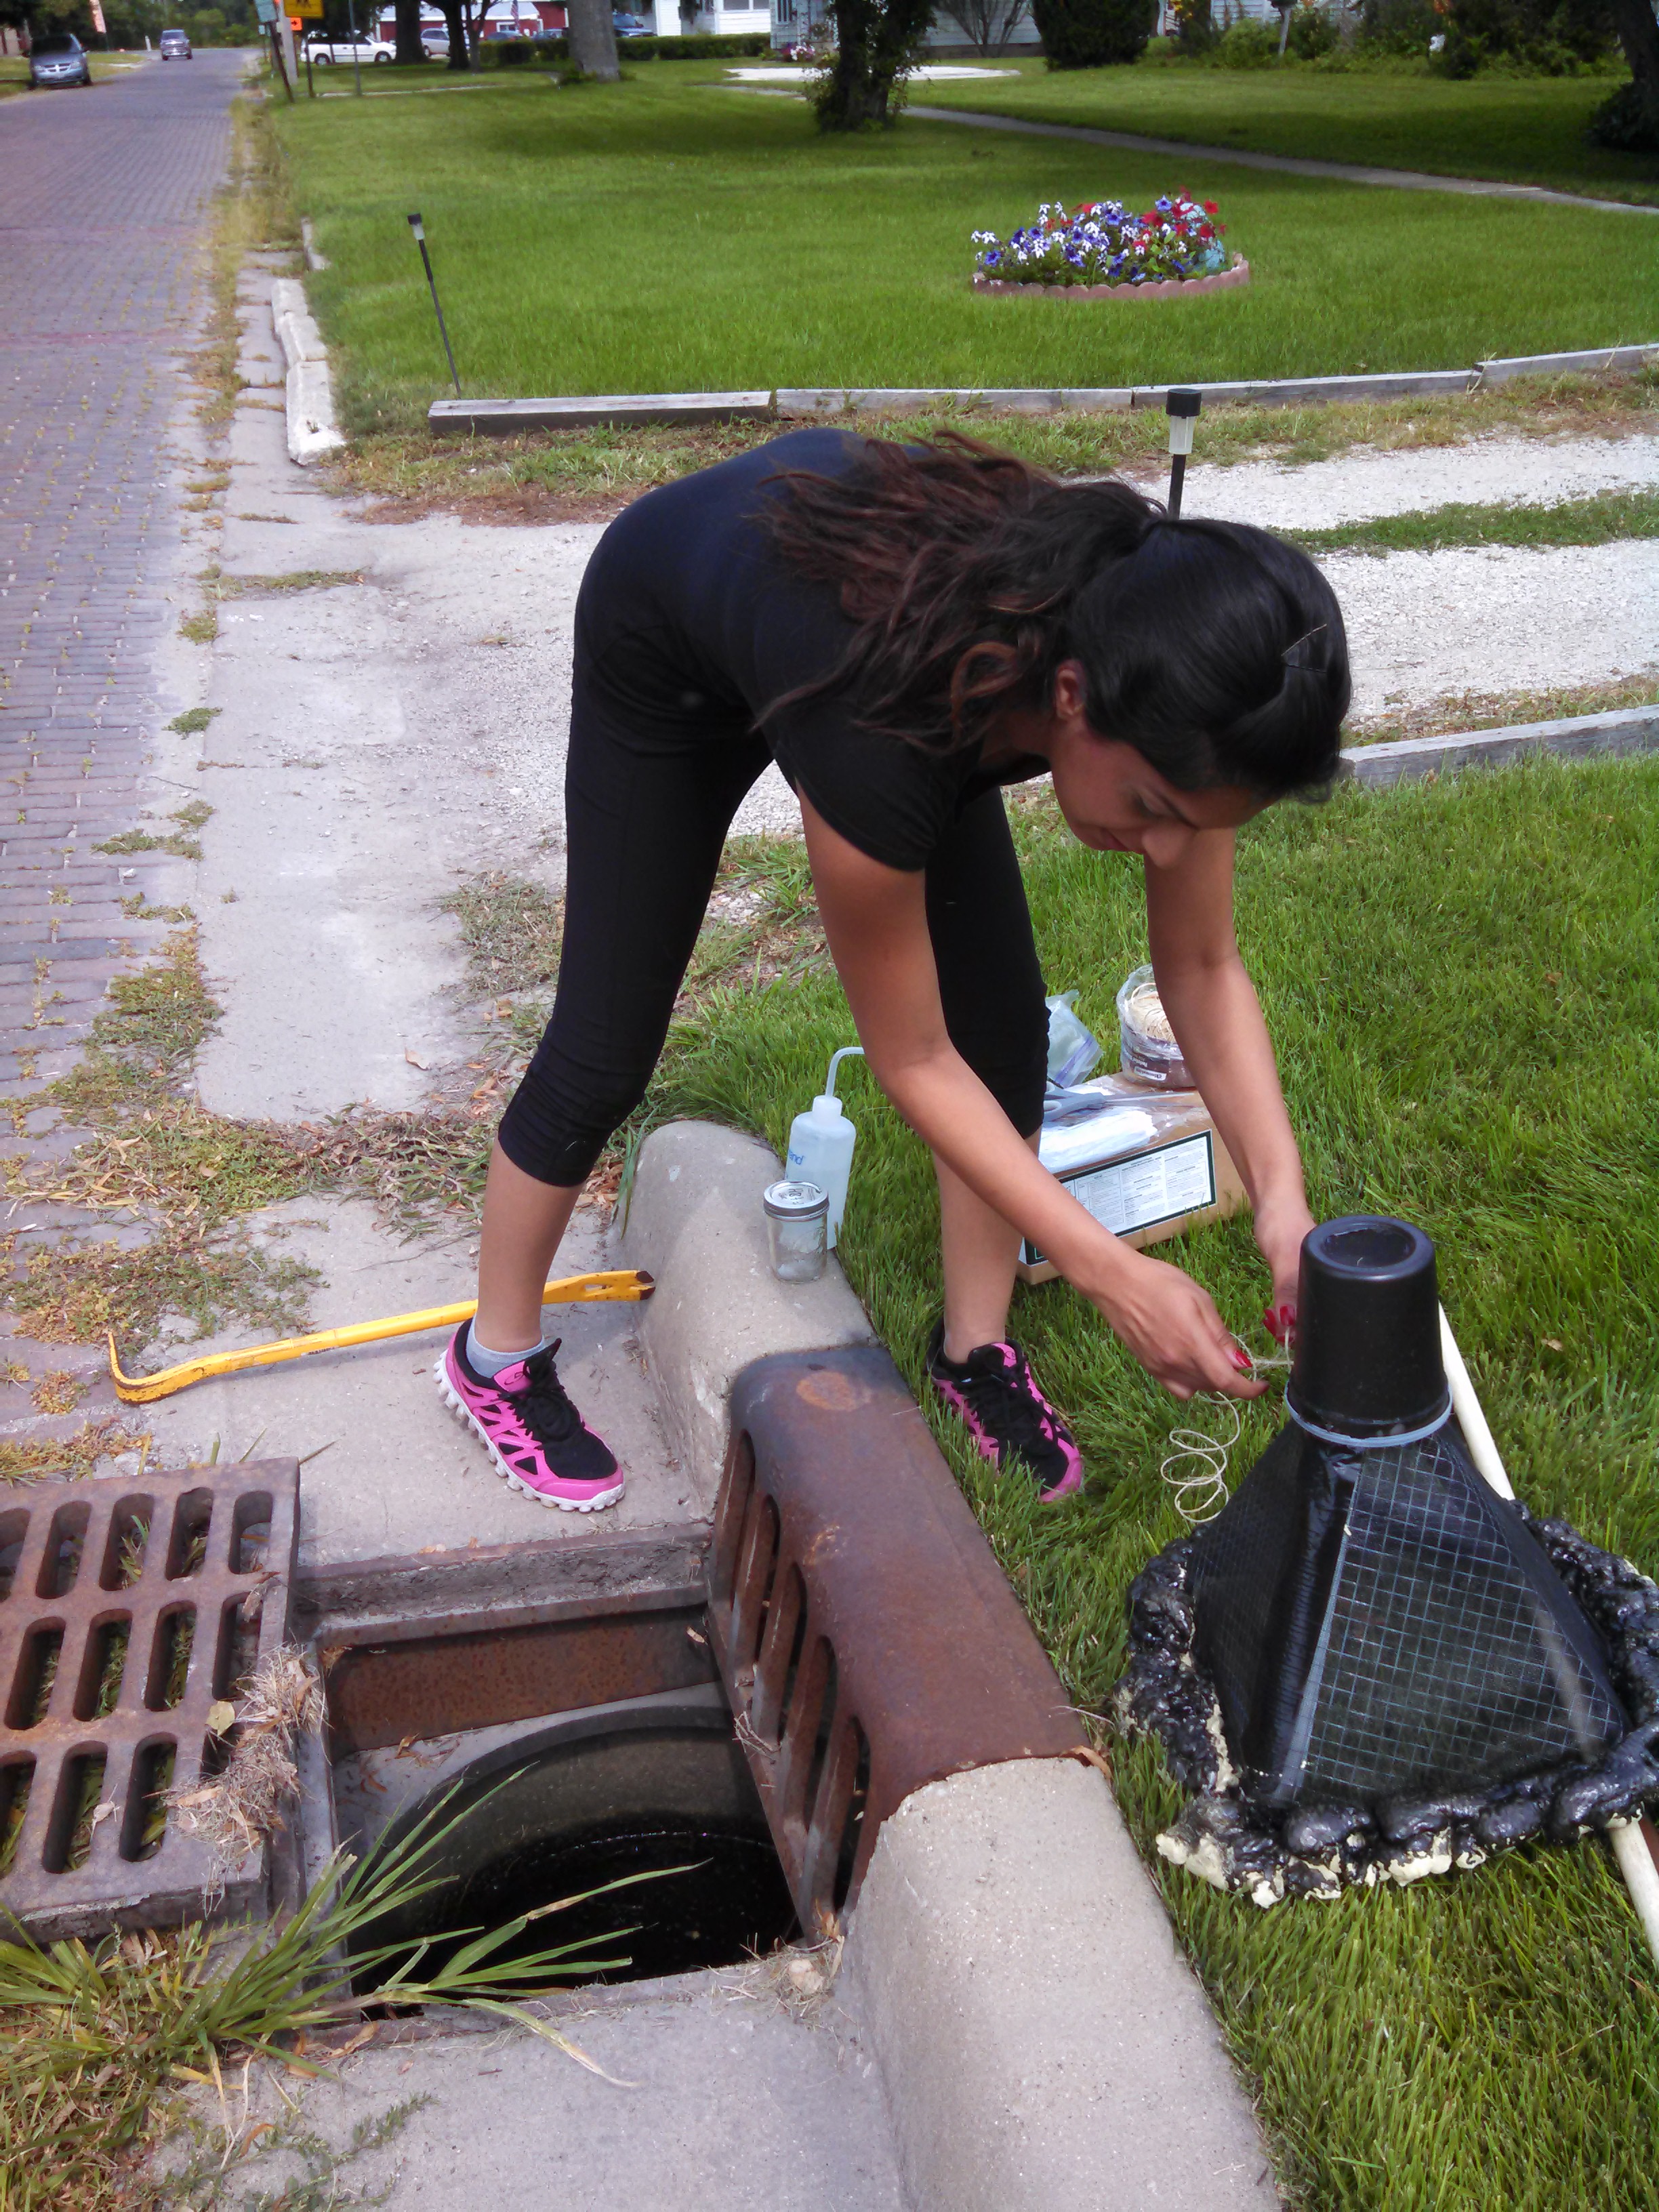 Graduate student Noor Malik sets up a leaf detritus experiment, designed to explore mosquito egg laying behavoir and larval survival, in a storm drain in Paxton, Illinois. Malik graduated from the University of Illinois in 2015. Credit, Allison Gardner